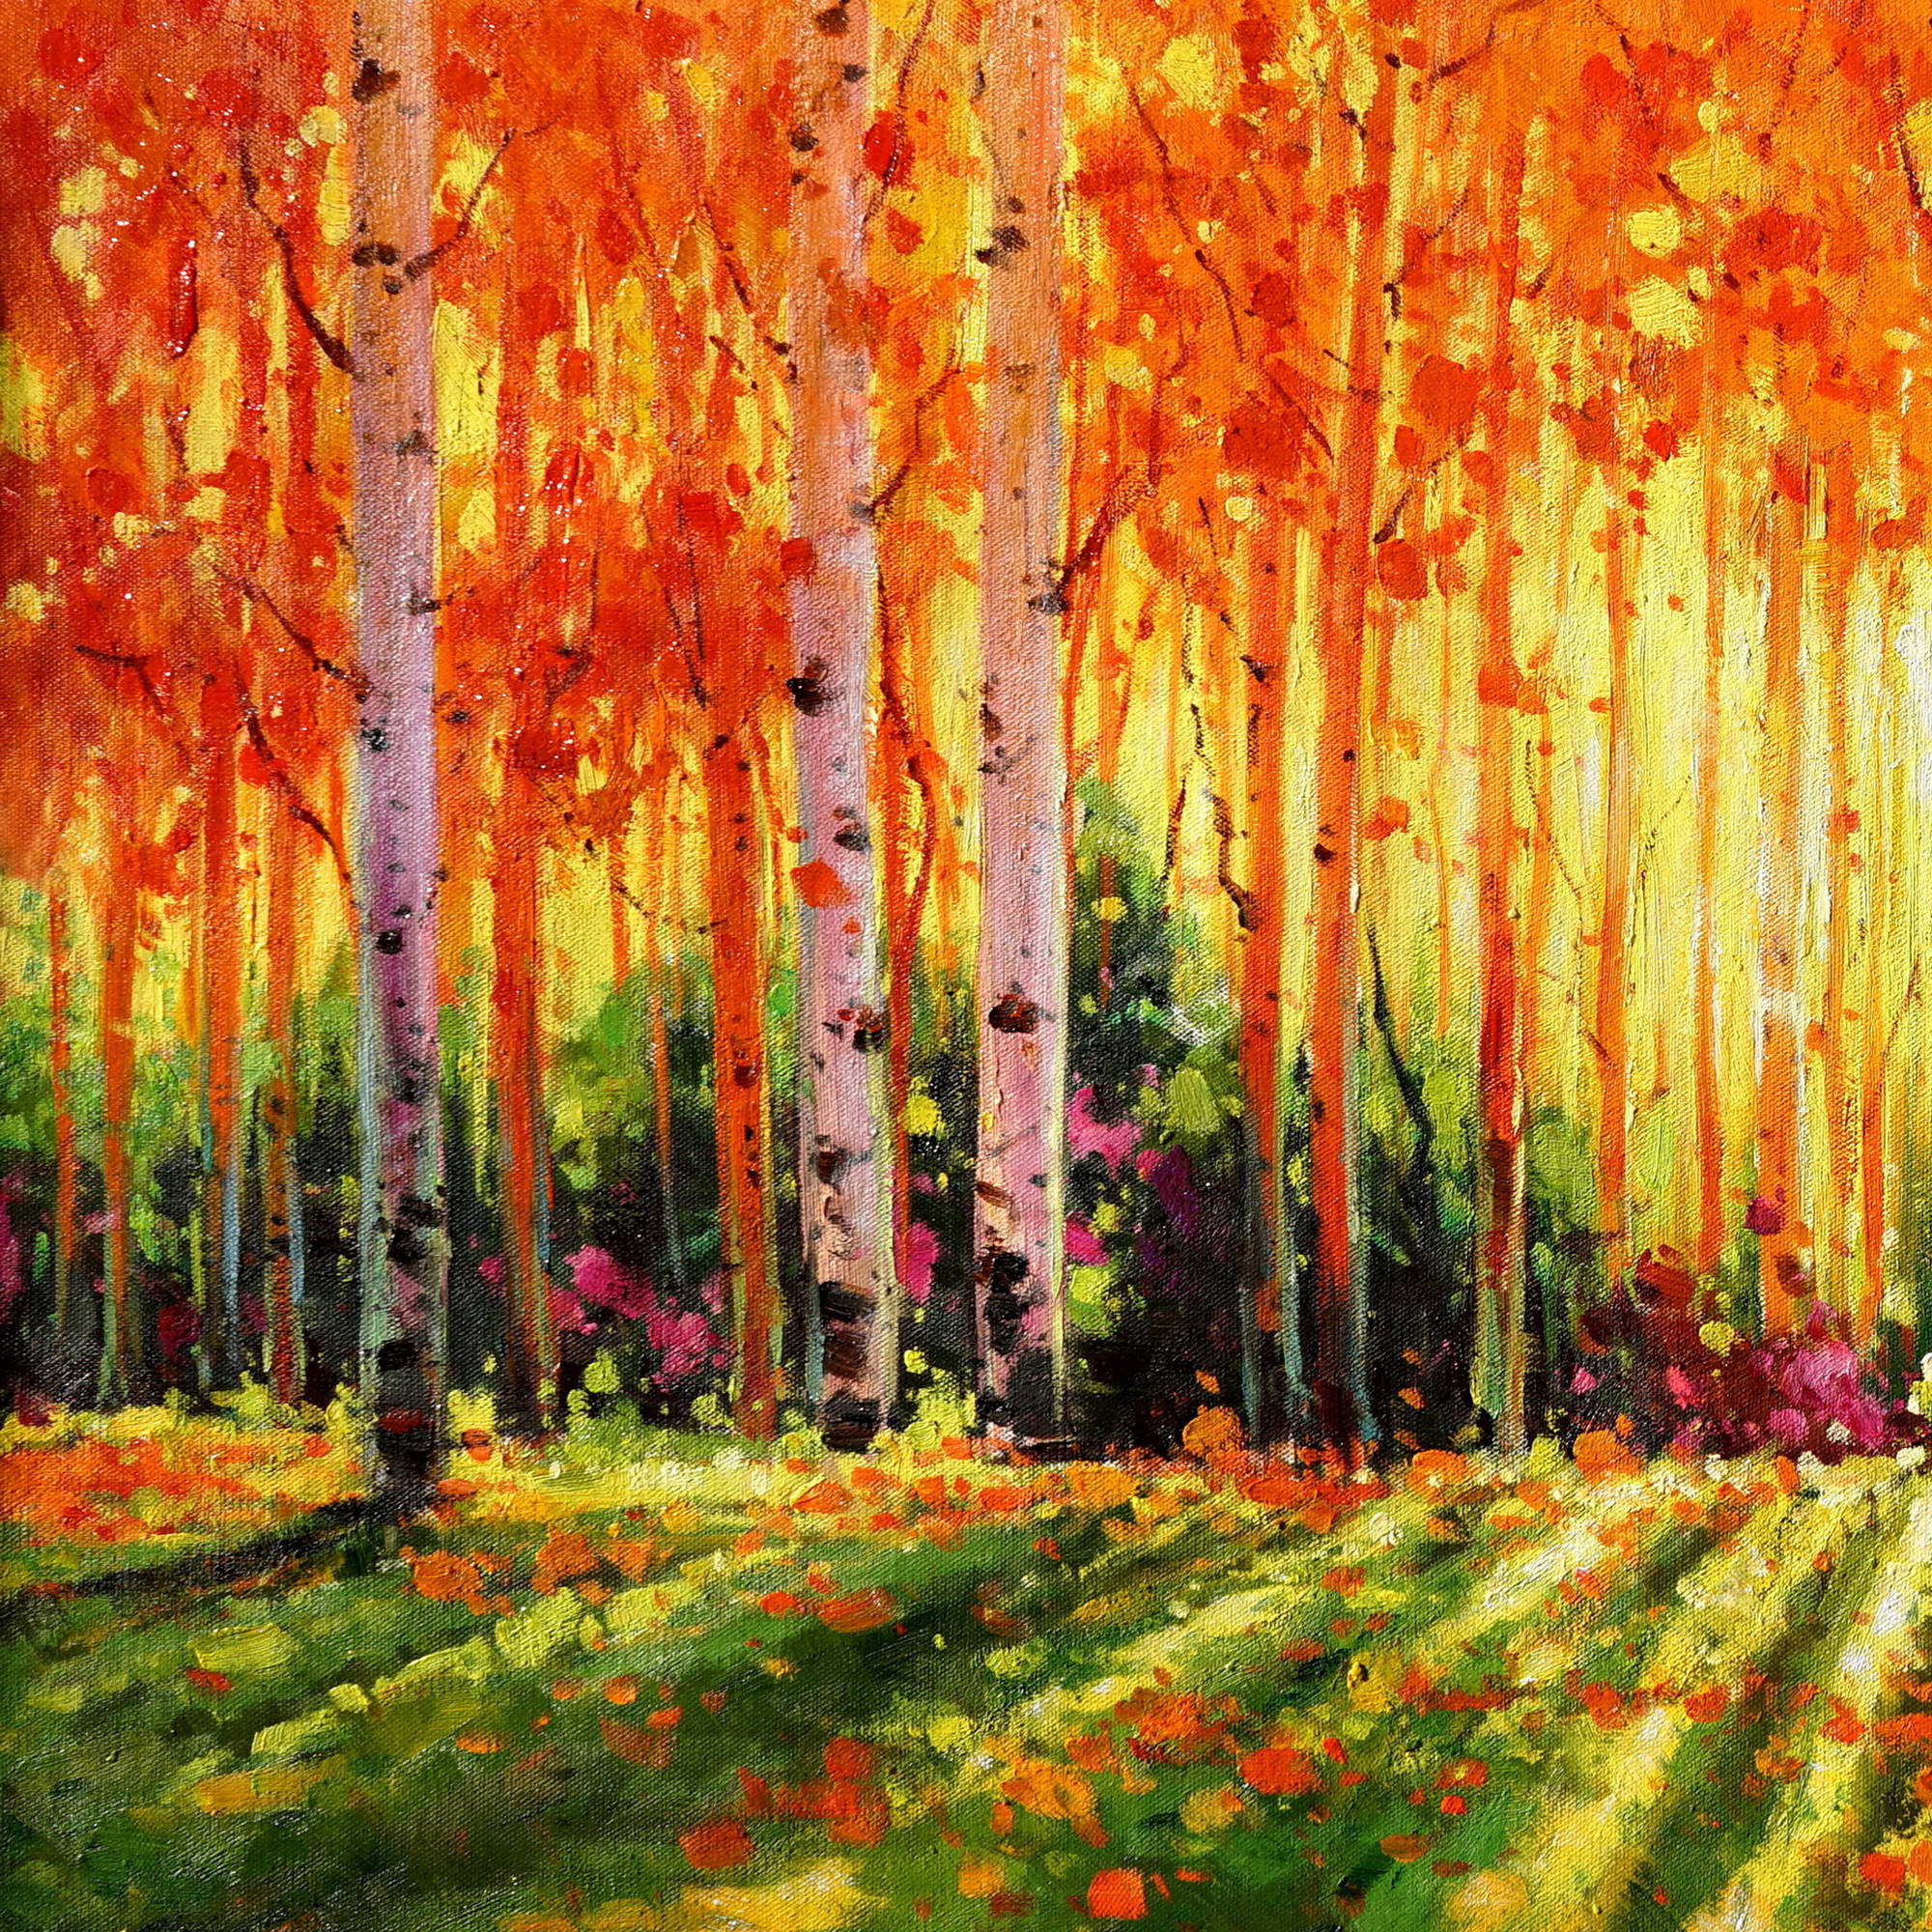 Hand painted Autumn in a birch forest 75x150cm